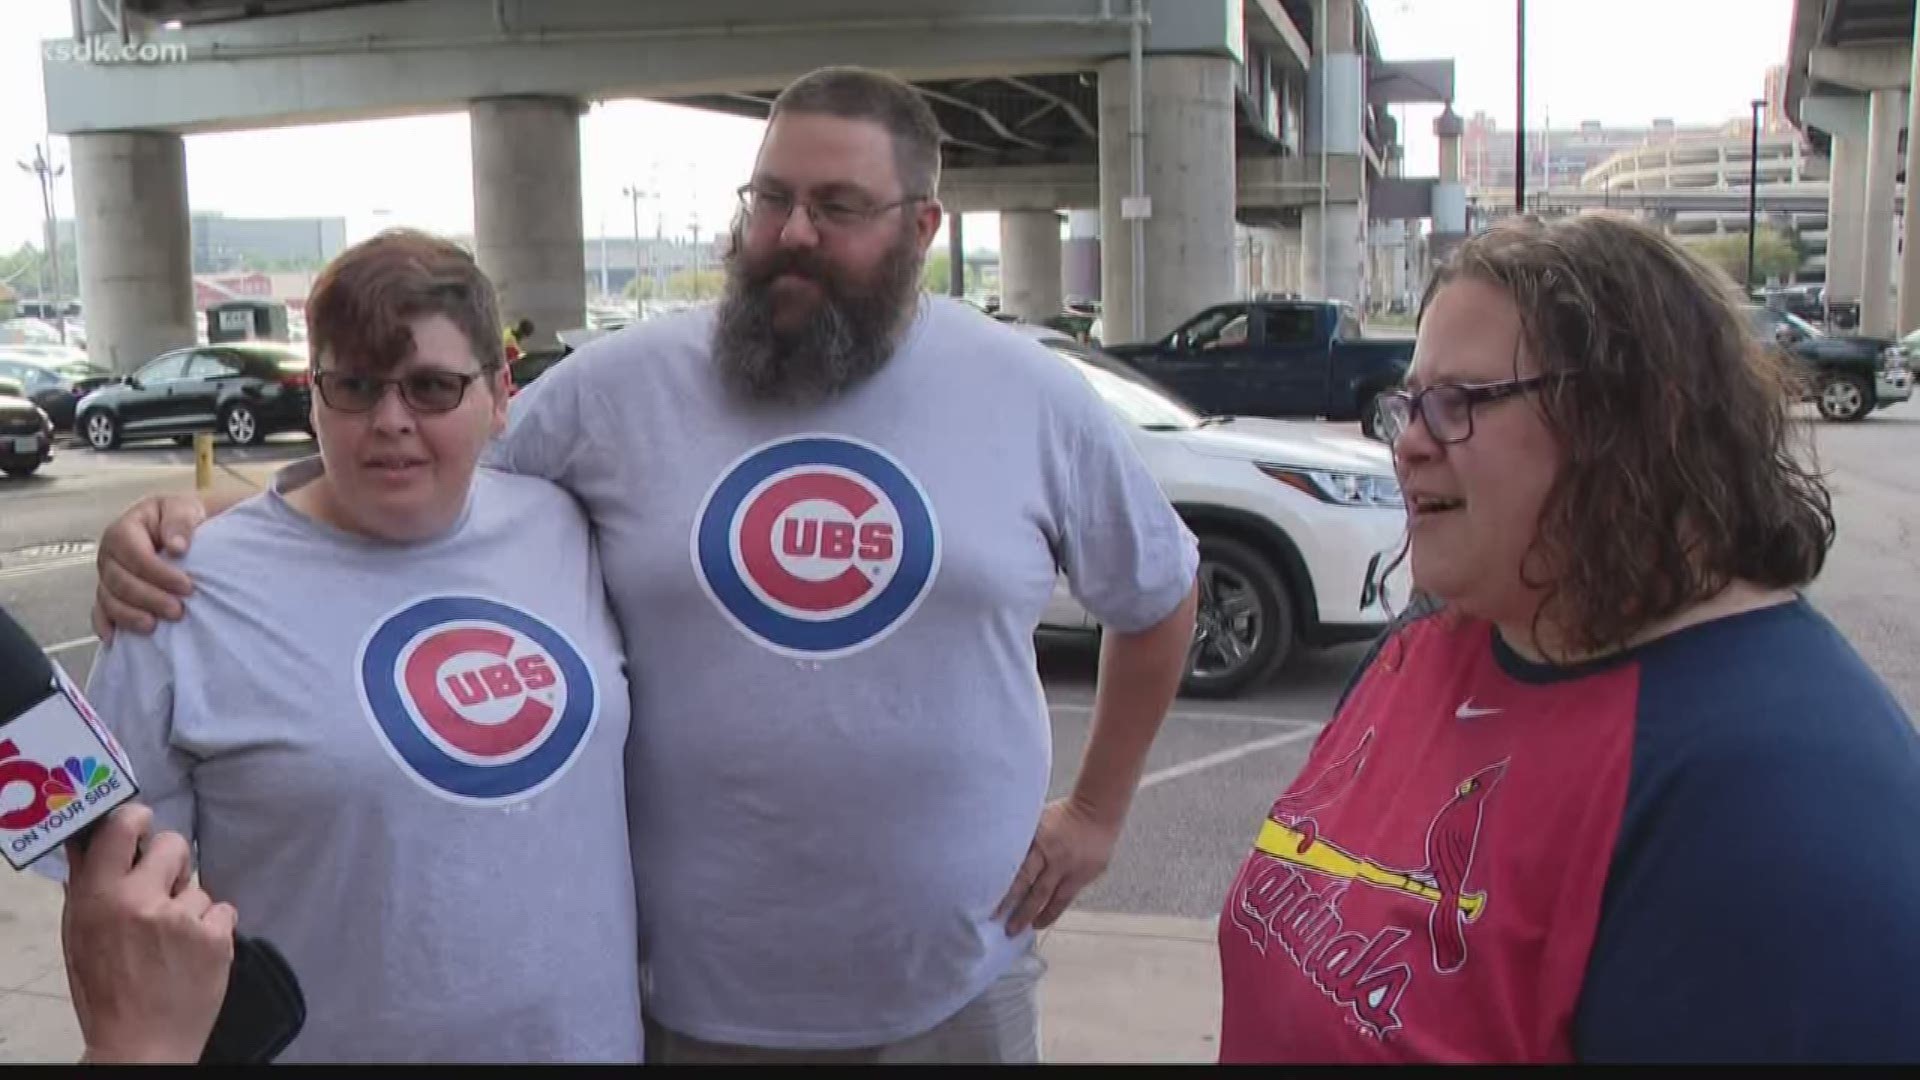 Summer Kroell couldn't have been more excited to be going to the game with her family Saturday night -- even though she's a Cardinals fan and they’re Cubs fans.